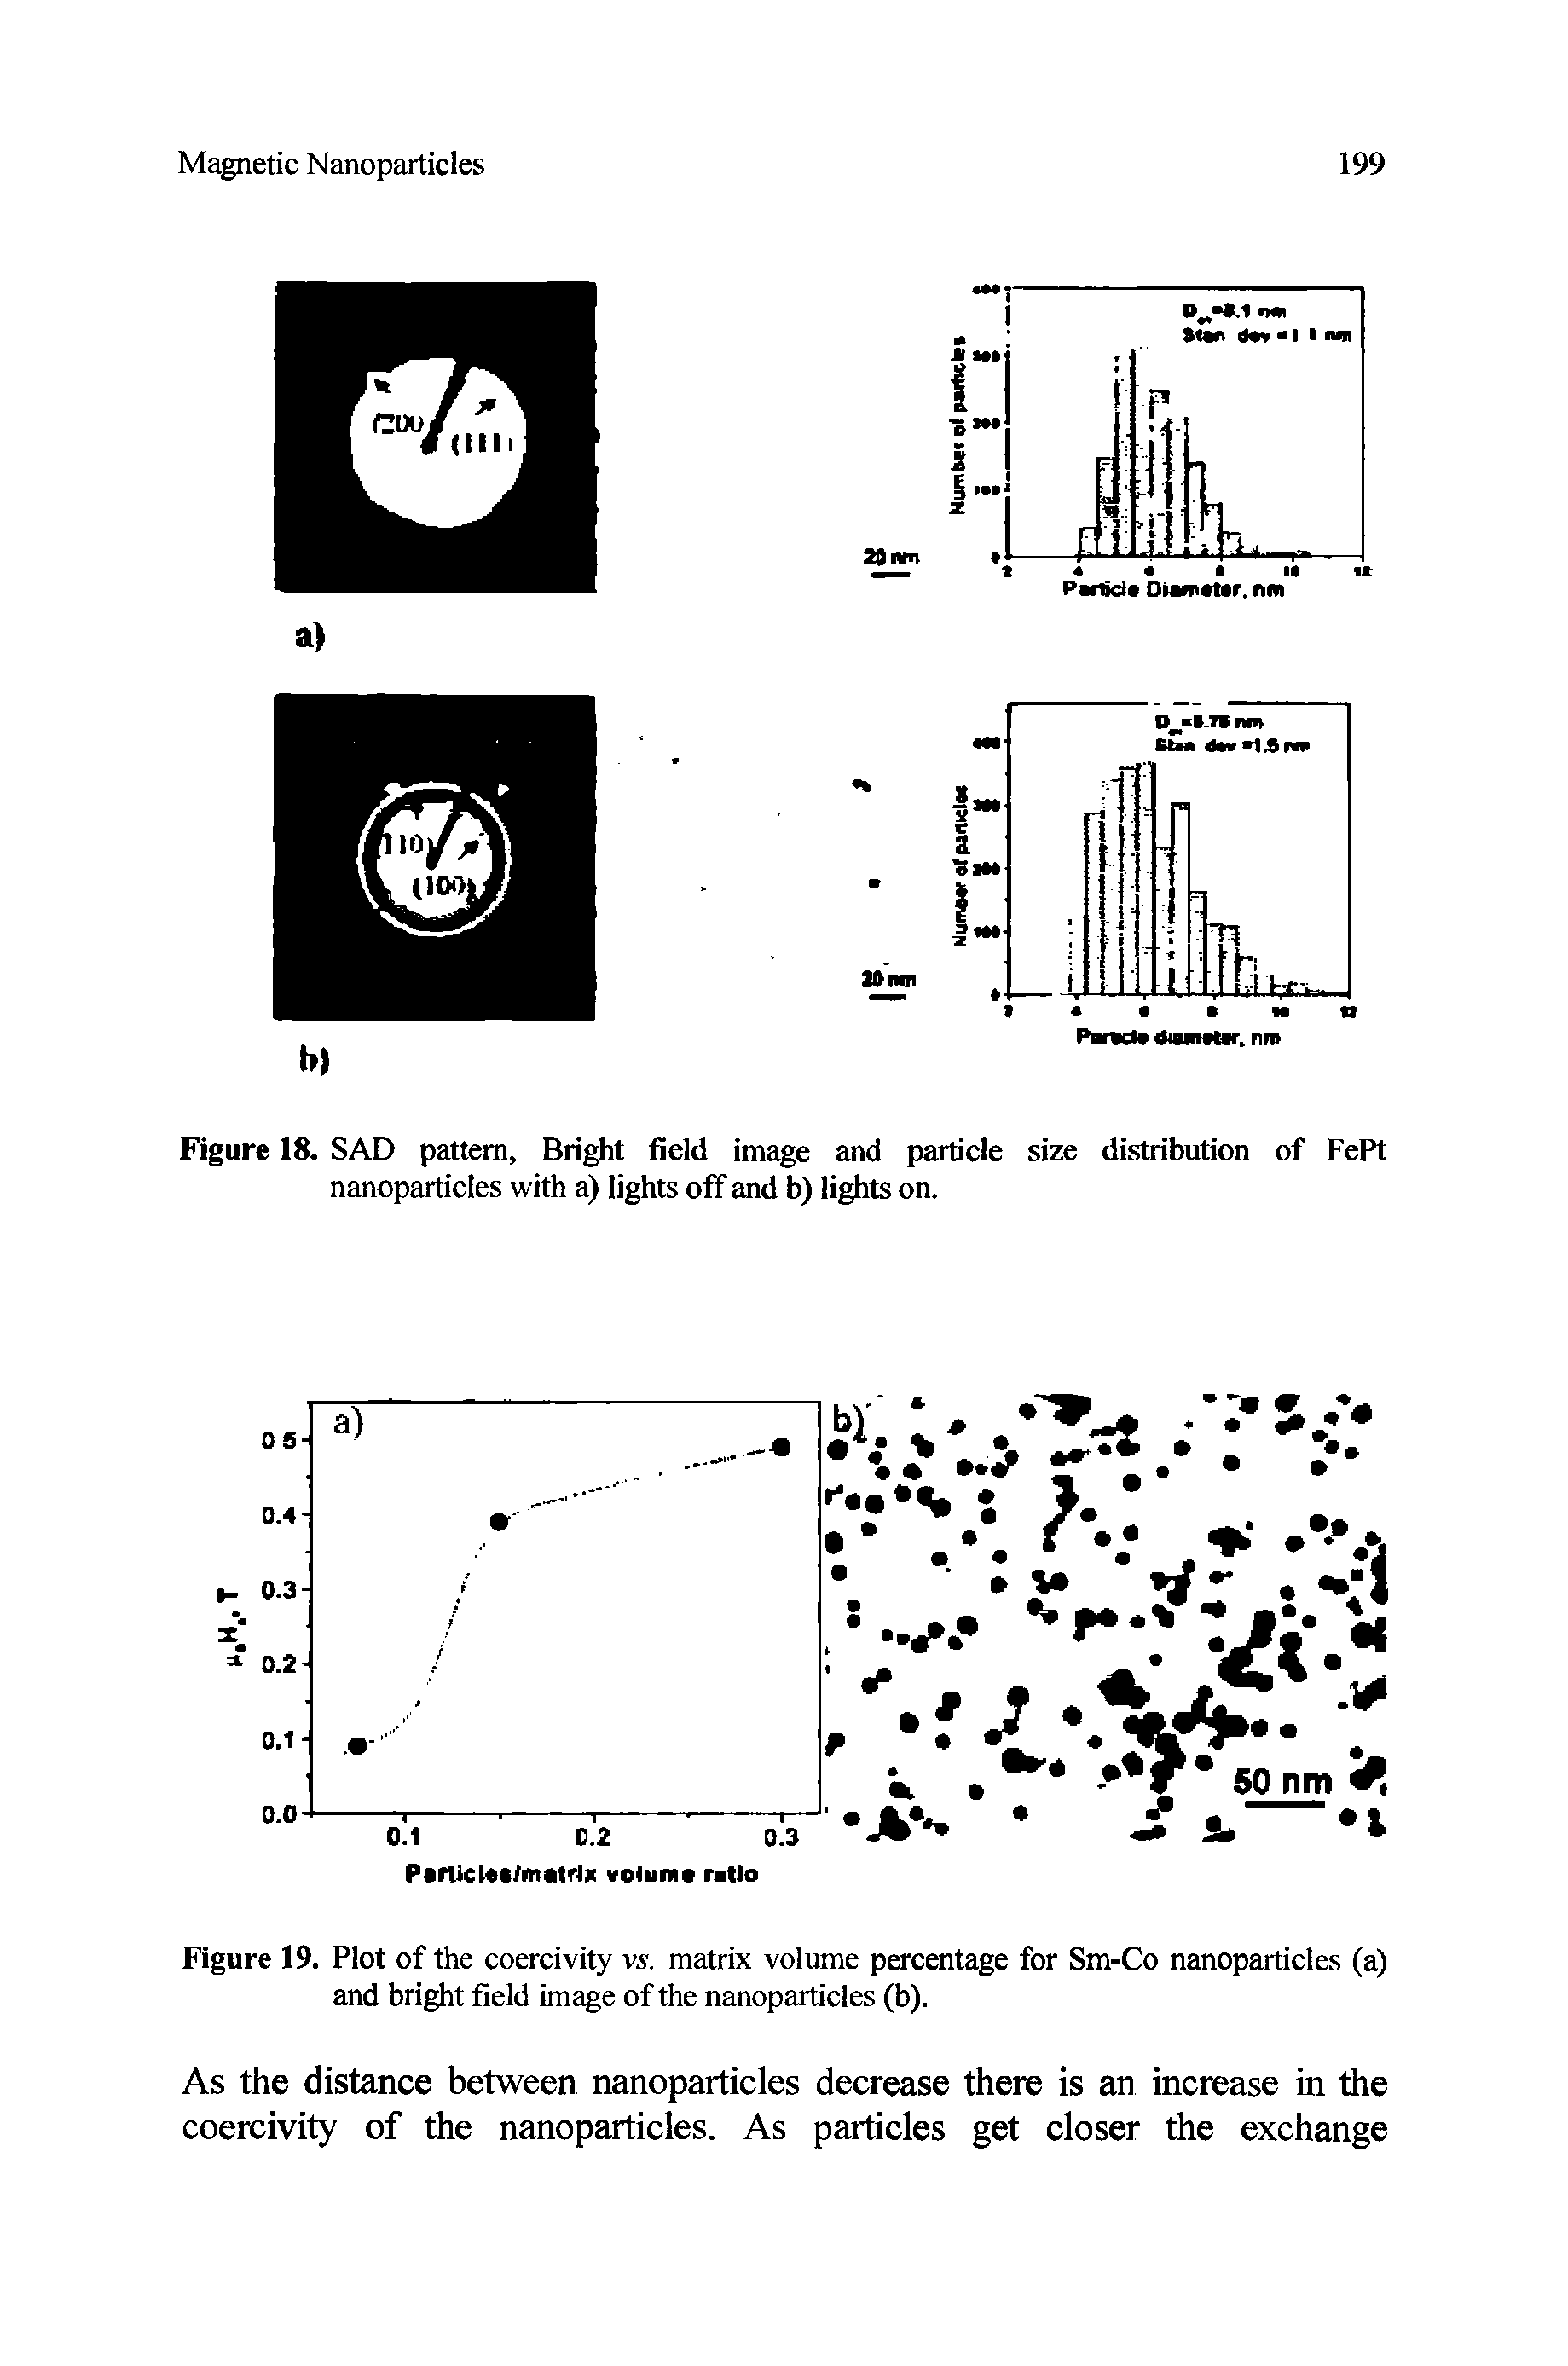 Figure 18. SAD pattern, Bright field image and particle size distribution of FePt nanoparticles with a) lights off and b) lights on.